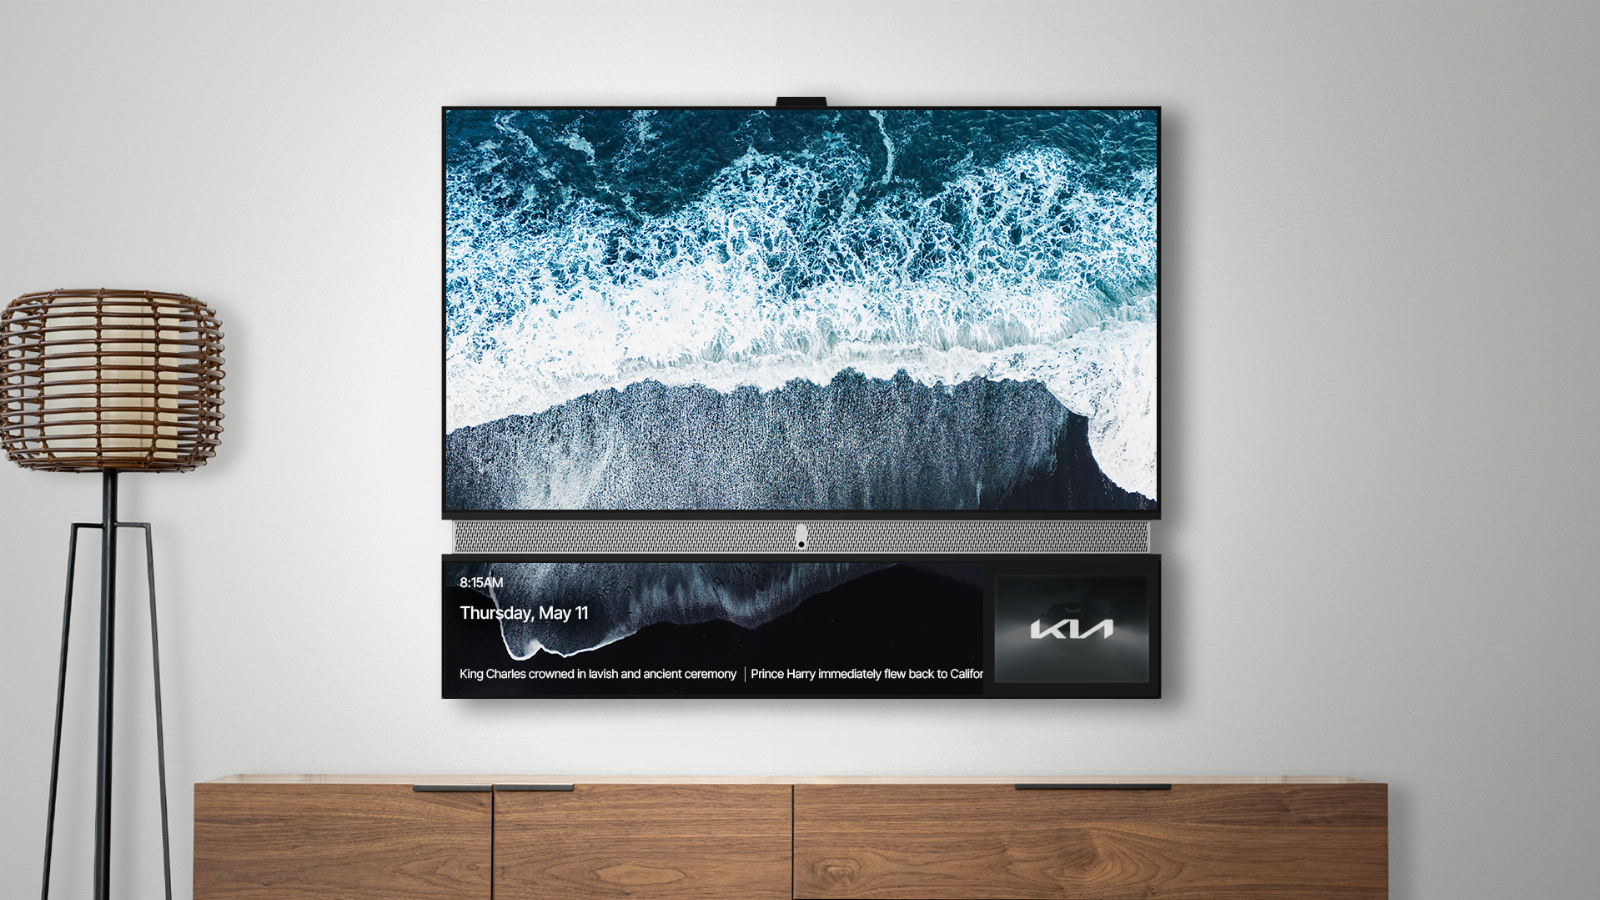 Telly starts shipping its free ad-supported TVs to its first round of customers